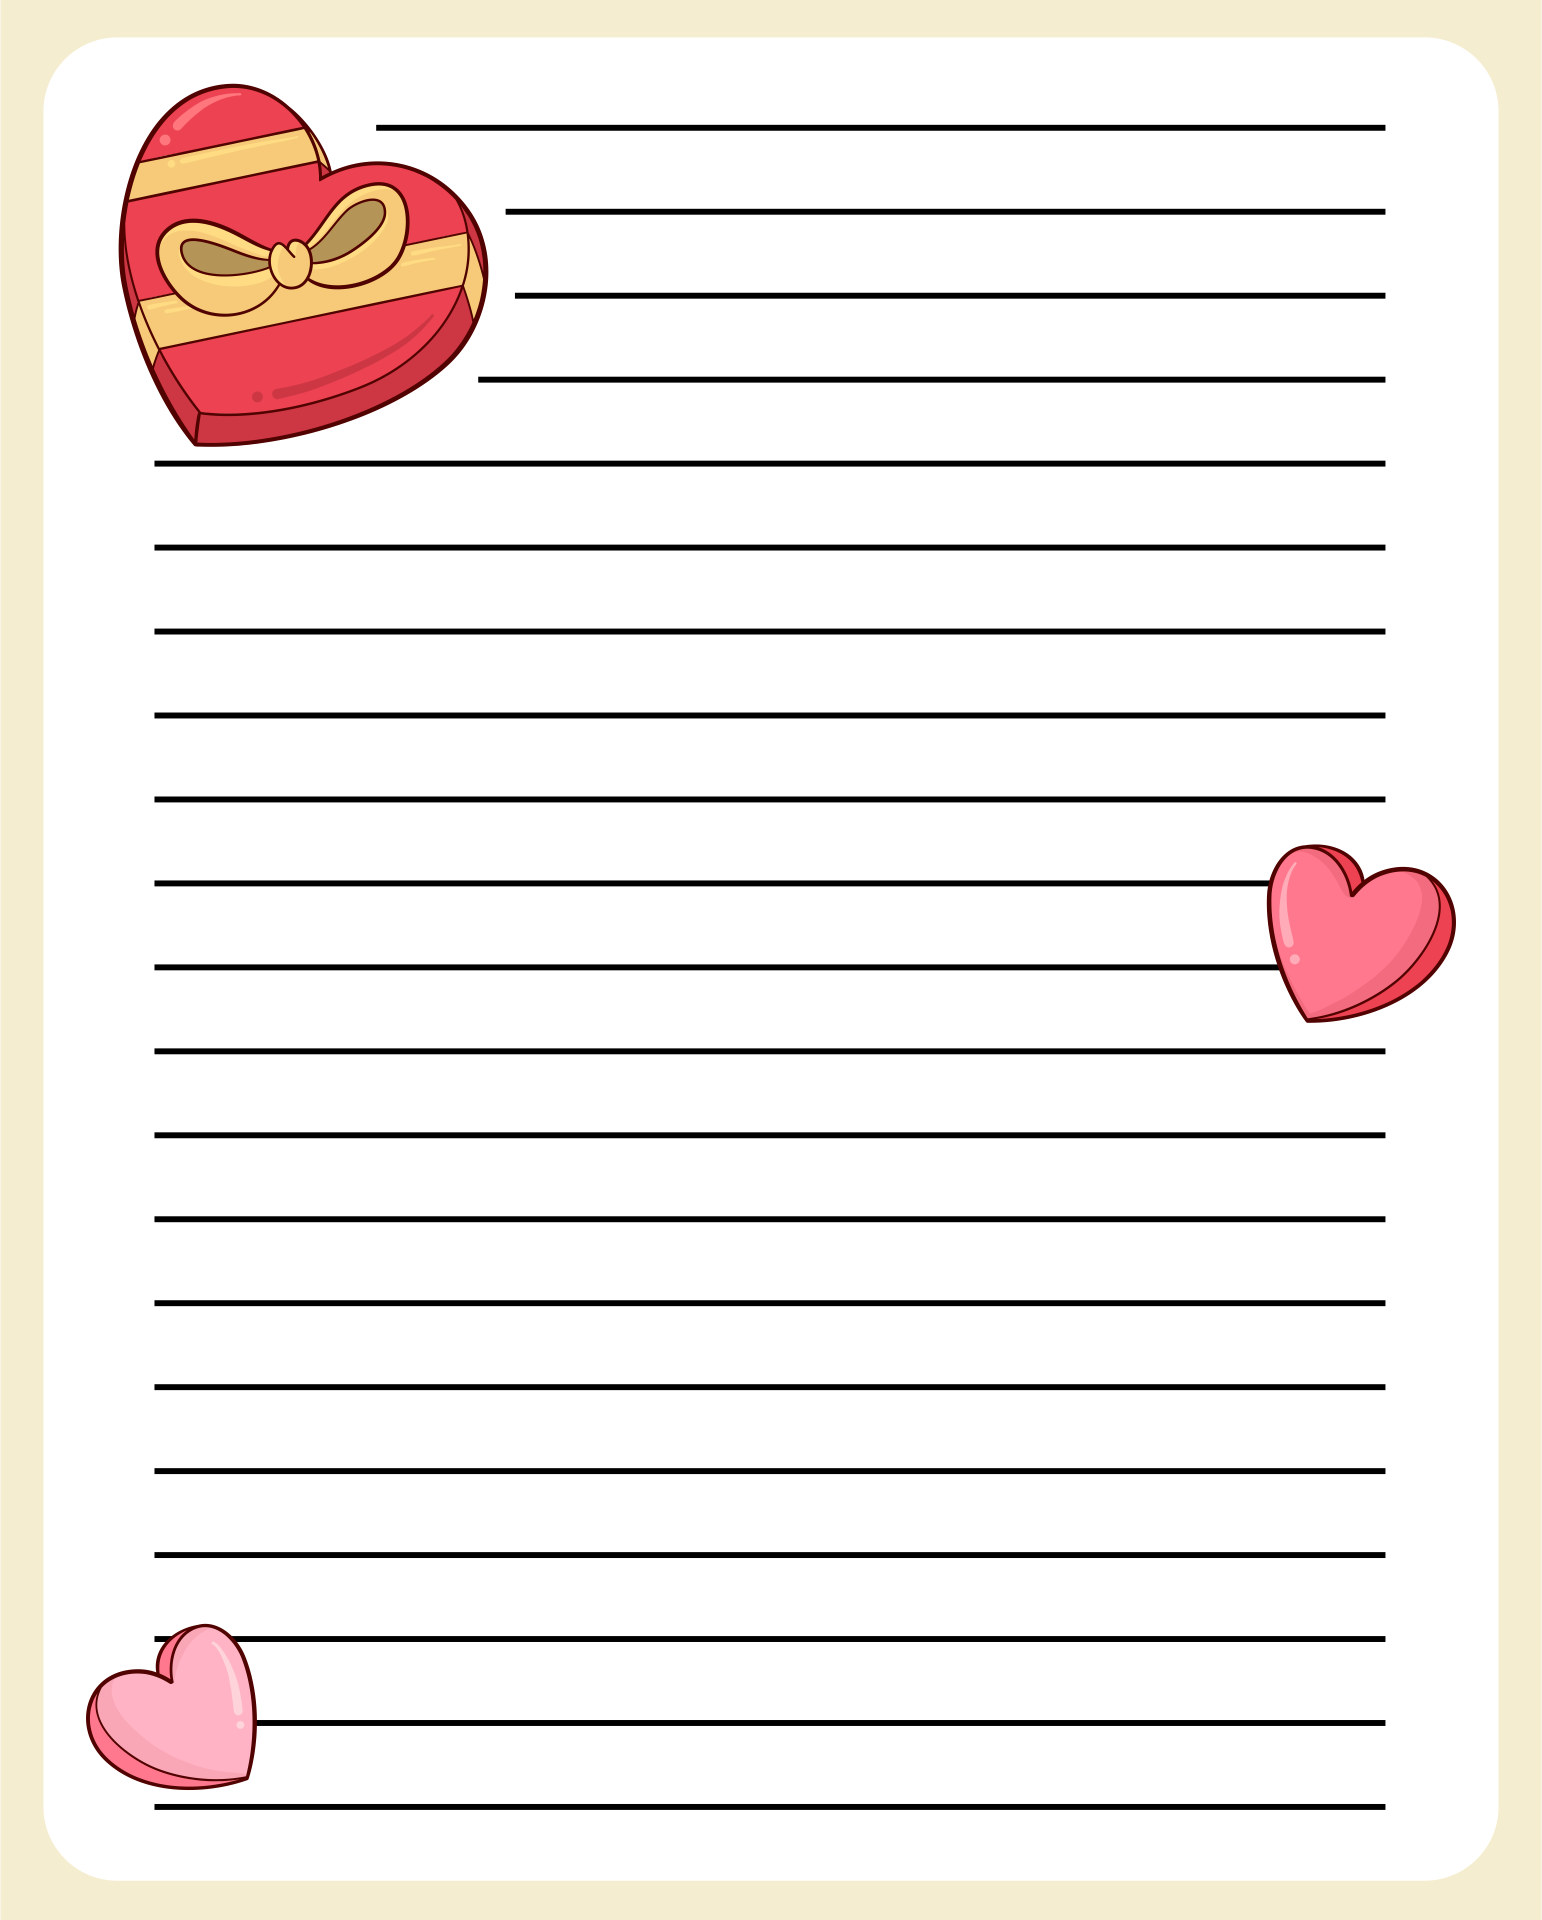 9 Best Images of Love Letter Templates Printable Free Printable Love